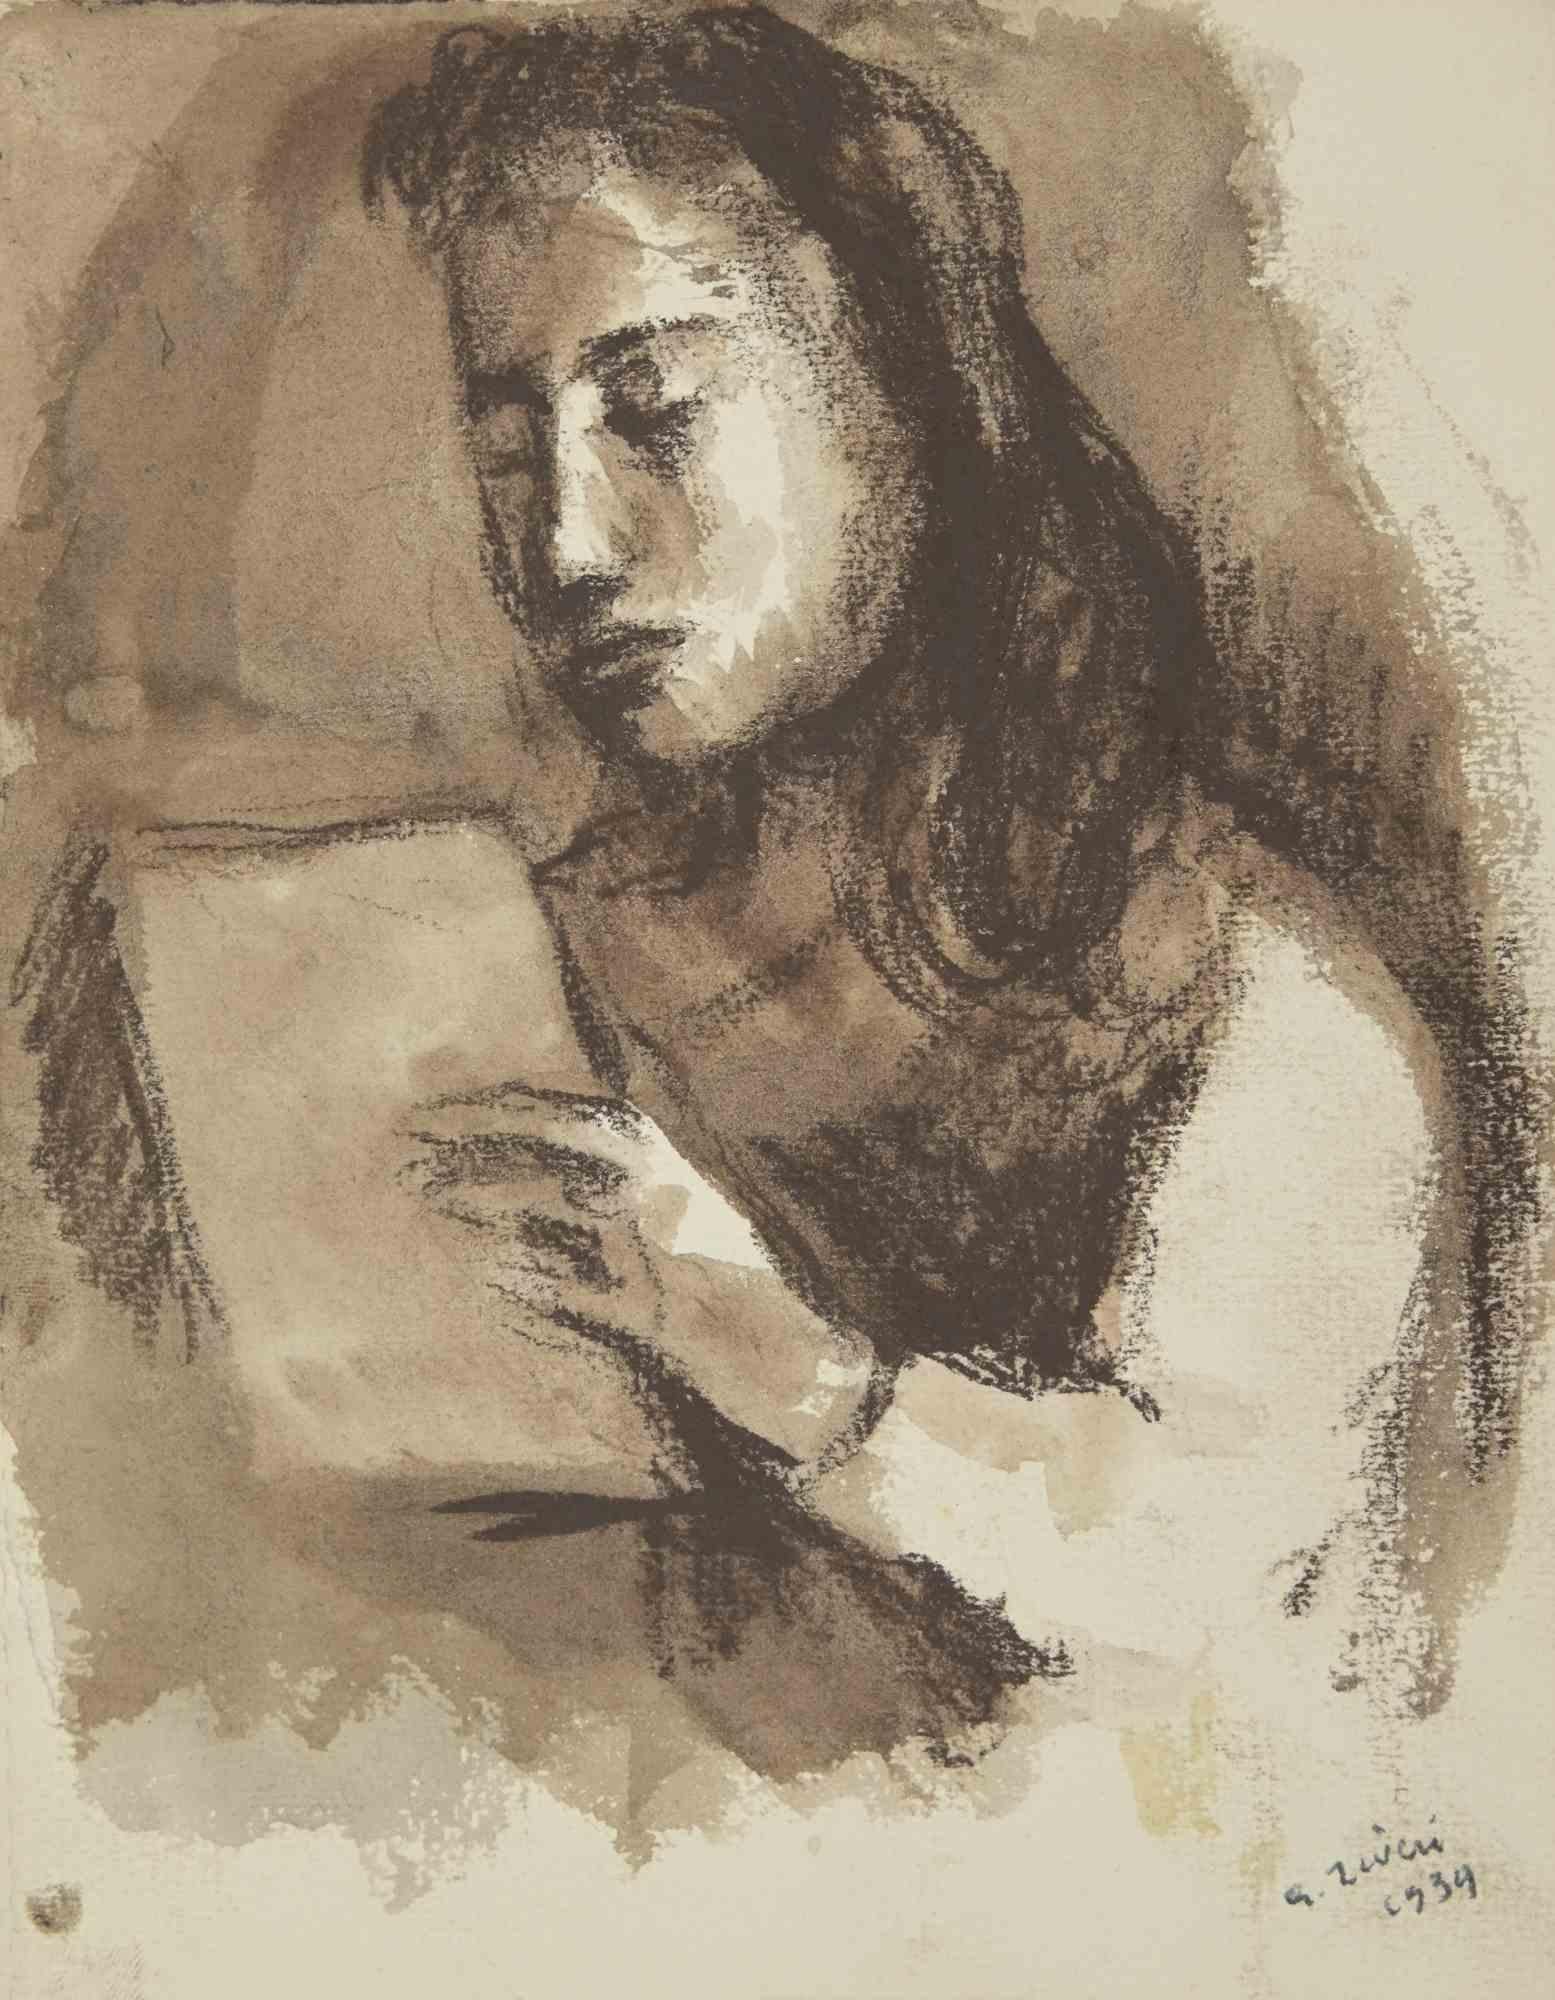 The  Reading Girl is a drawing realized by Alberto Ziveri in 1939

Charcoal and watercolor on paper.

Hand-signed.

In good condition with slight foxing.

The artwork is represented through deft strokes masterly.

Alberto Ziveri (Rome,1908 – 1990),